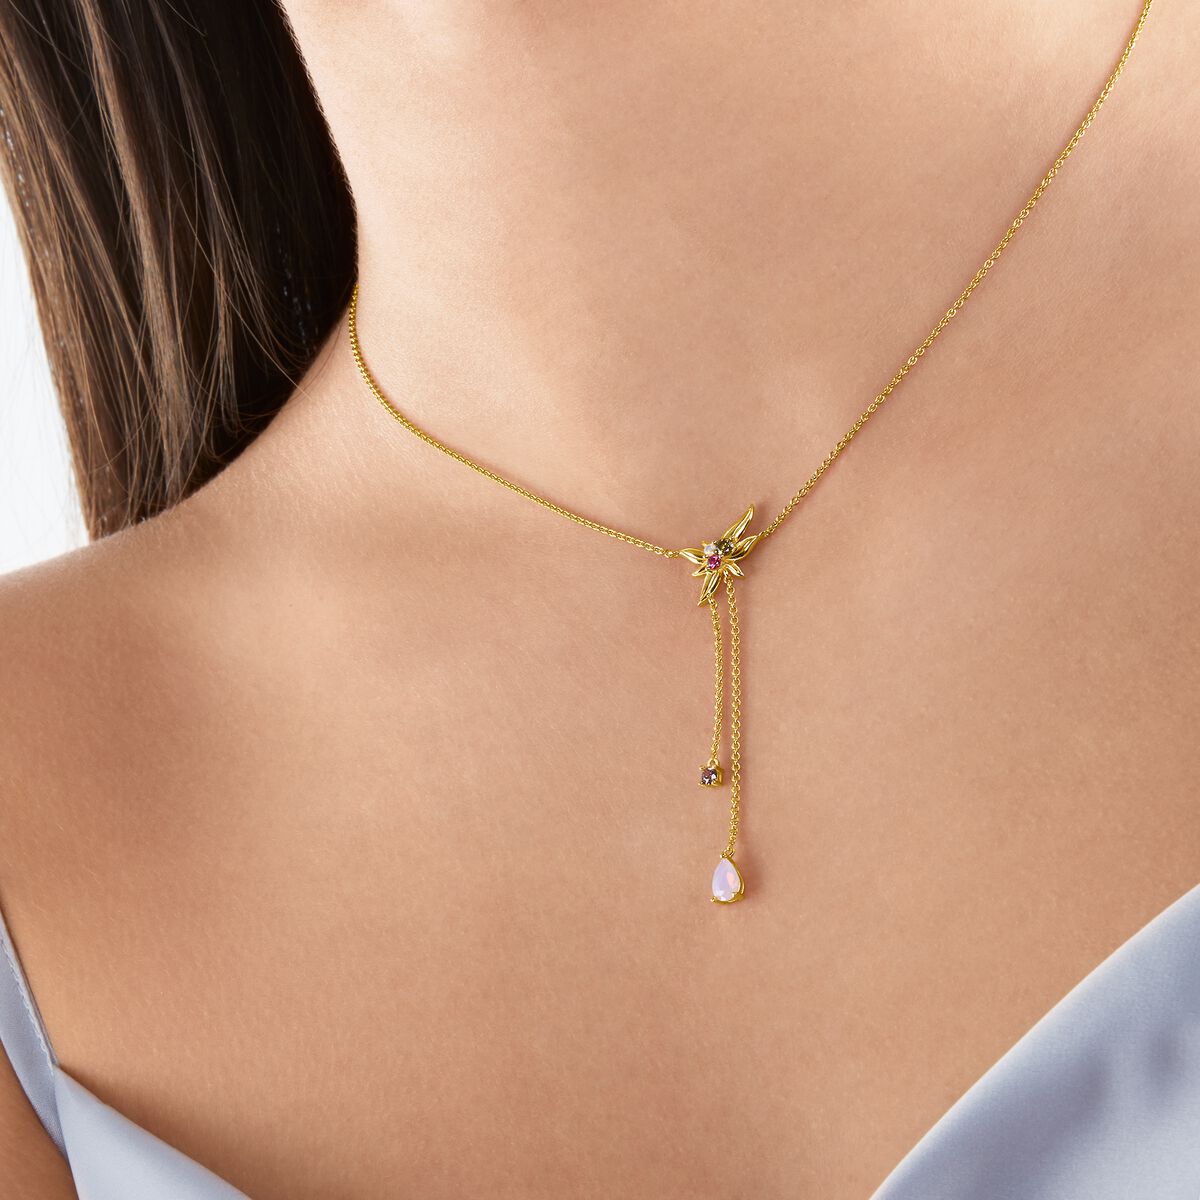 Gold Plated Leaf Design Pendant Necklace Chain for Women Girls - Sale